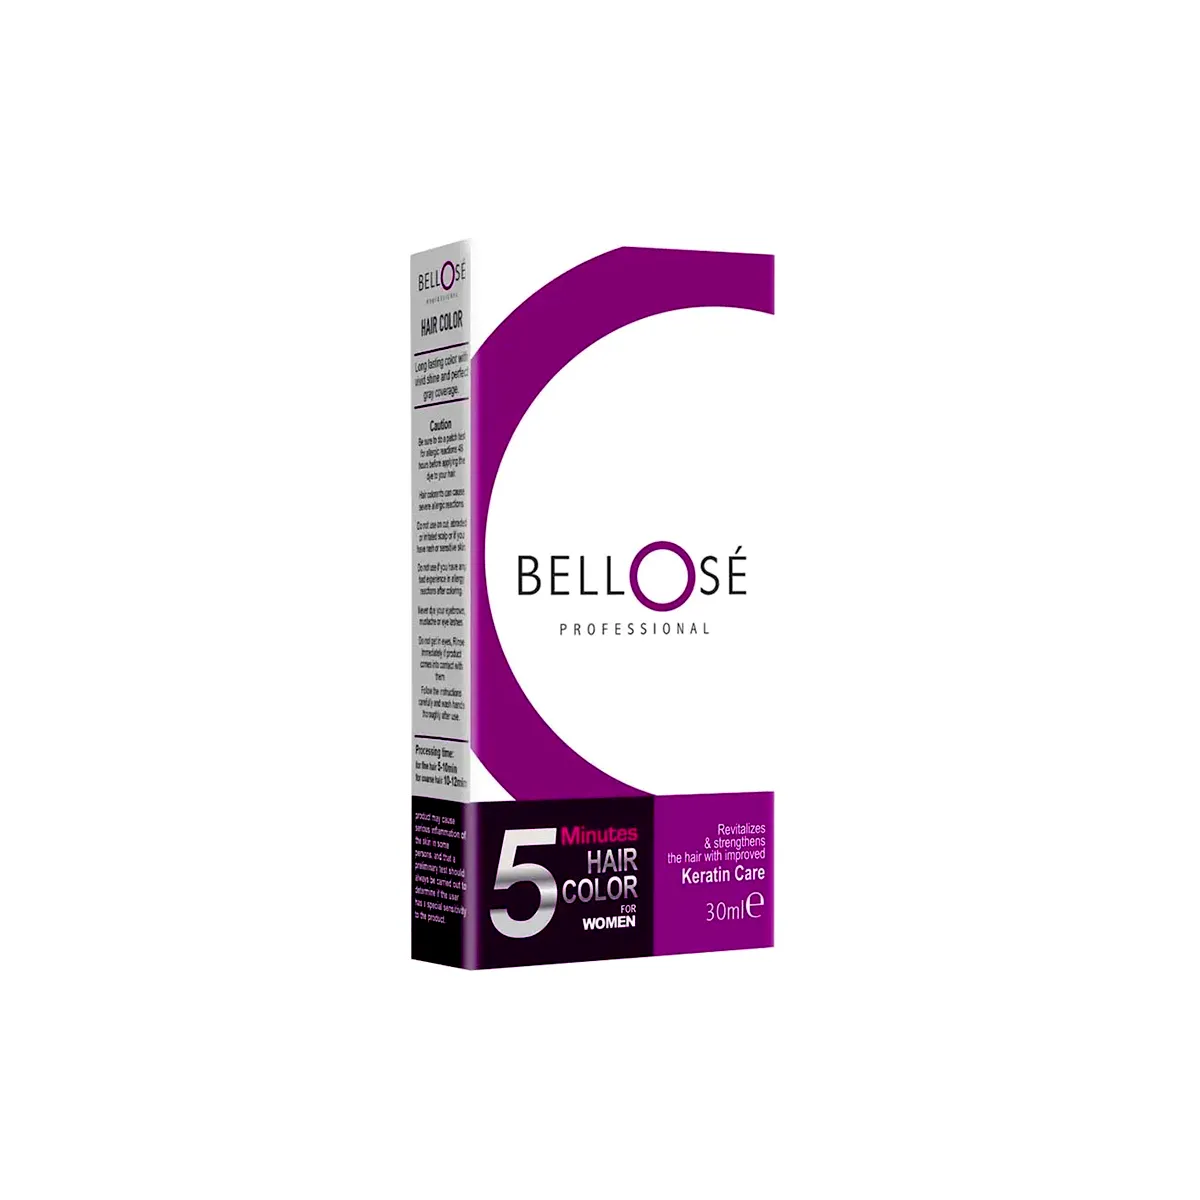 First product image of Bellose Women Hair Color Black 1.0 30ml